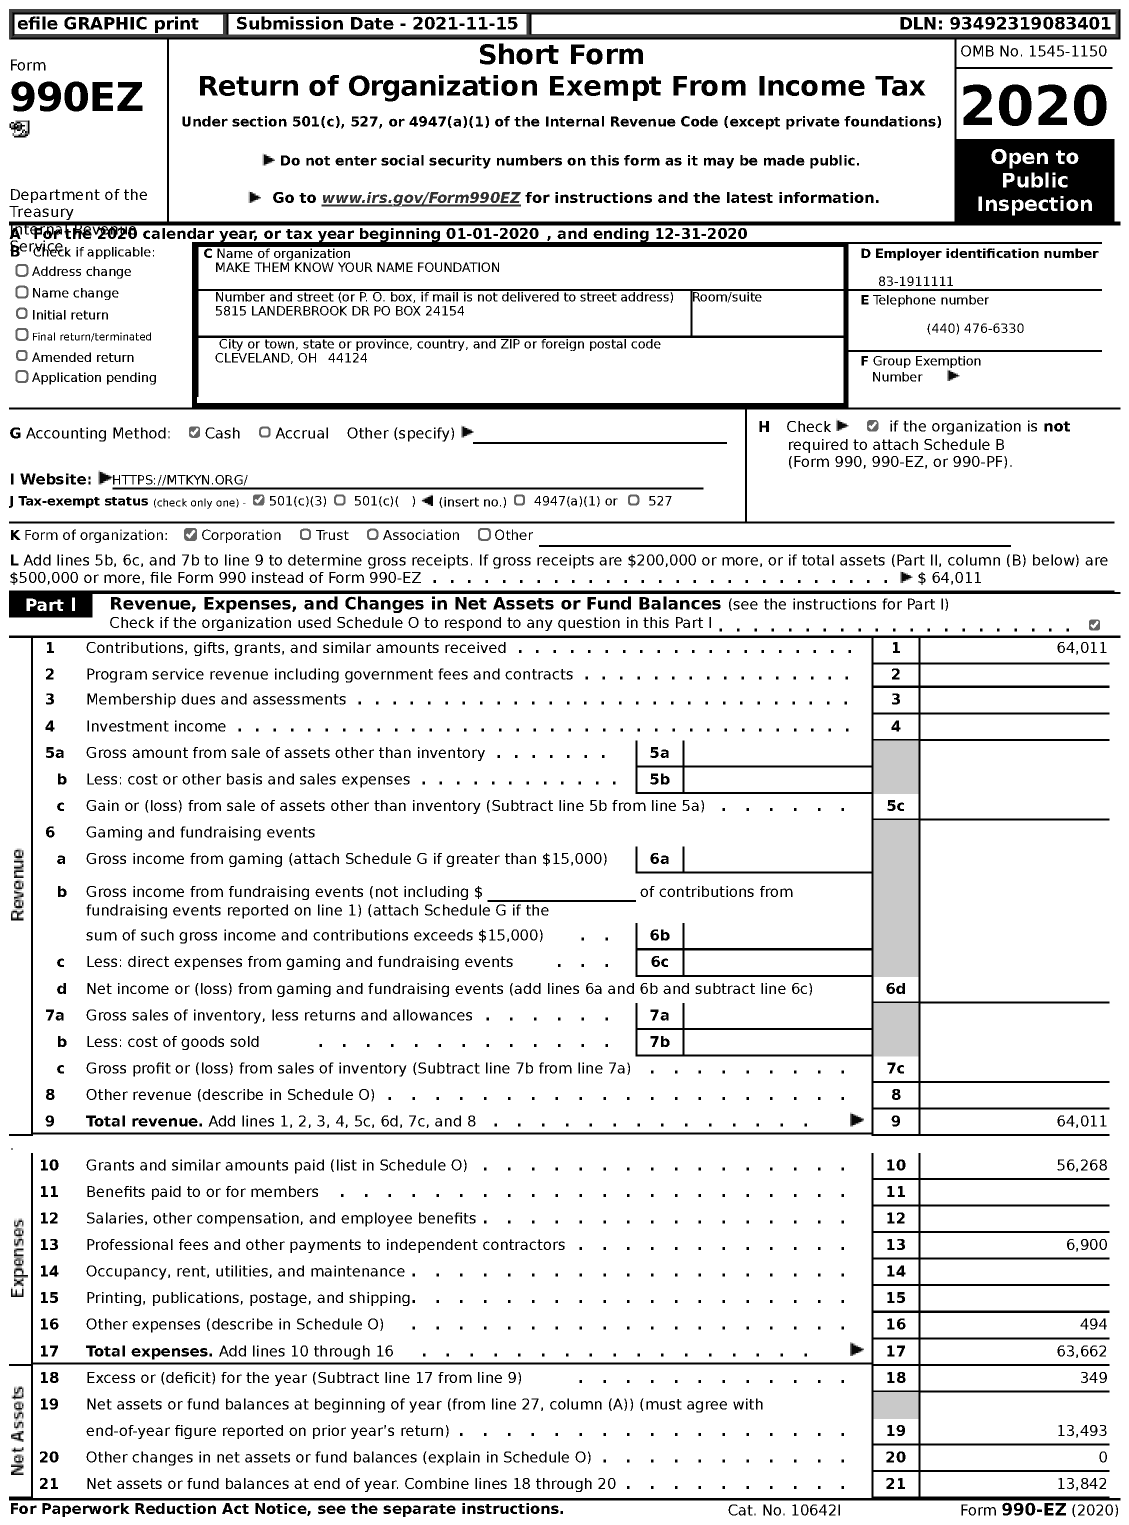 Image of first page of 2020 Form 990EZ for Make Them Know Your Name Foundation